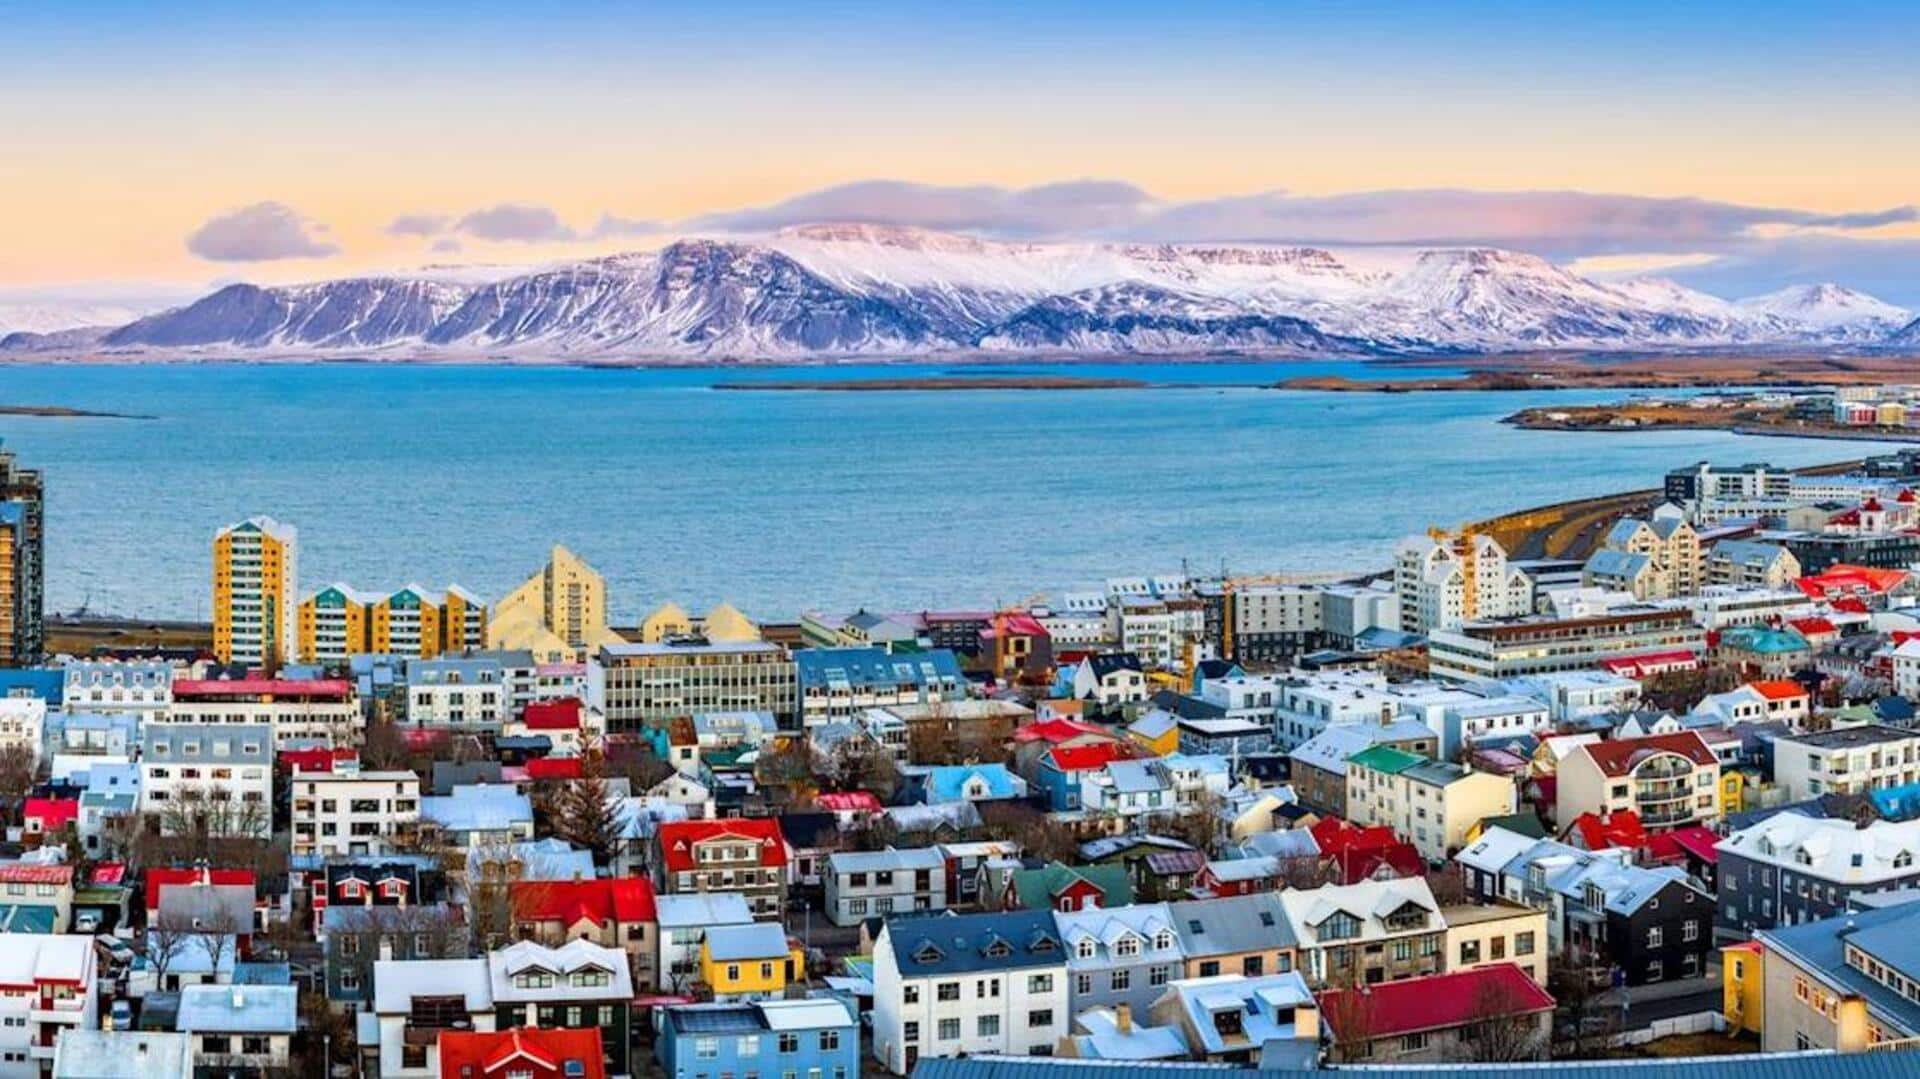 Have you been to these natural wonders in Reykjavik